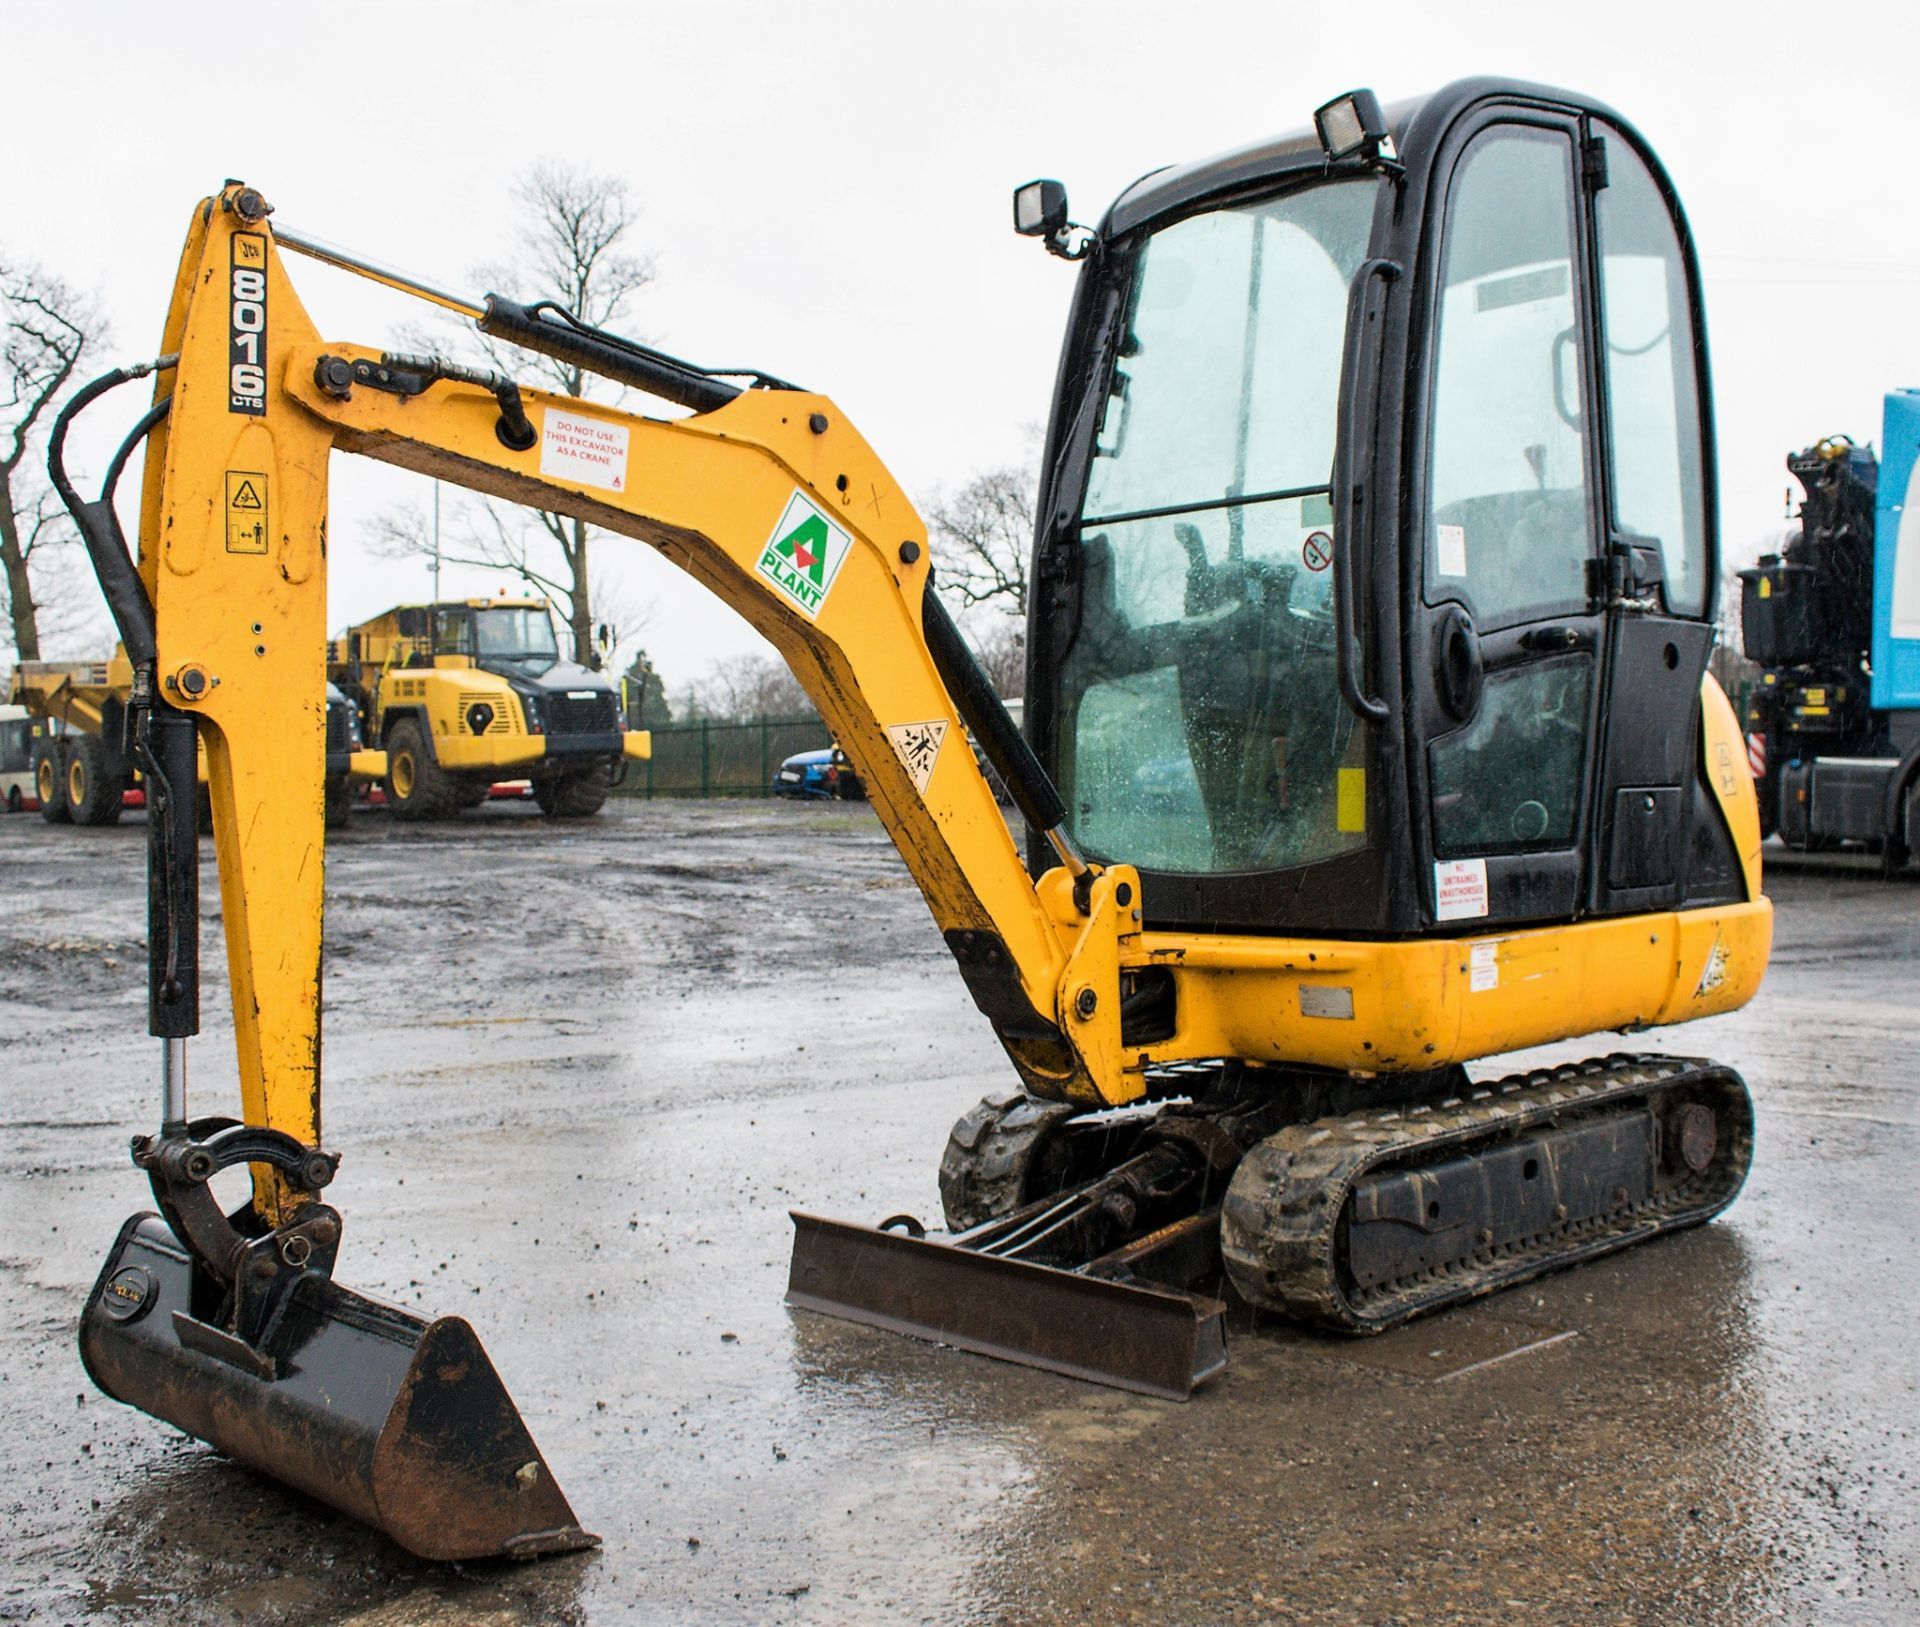 JCB 8016 CTS 1.5 tonne rubber tracked excavator Year: 2013 S/N: 2071316 Recorded Hours: 1686